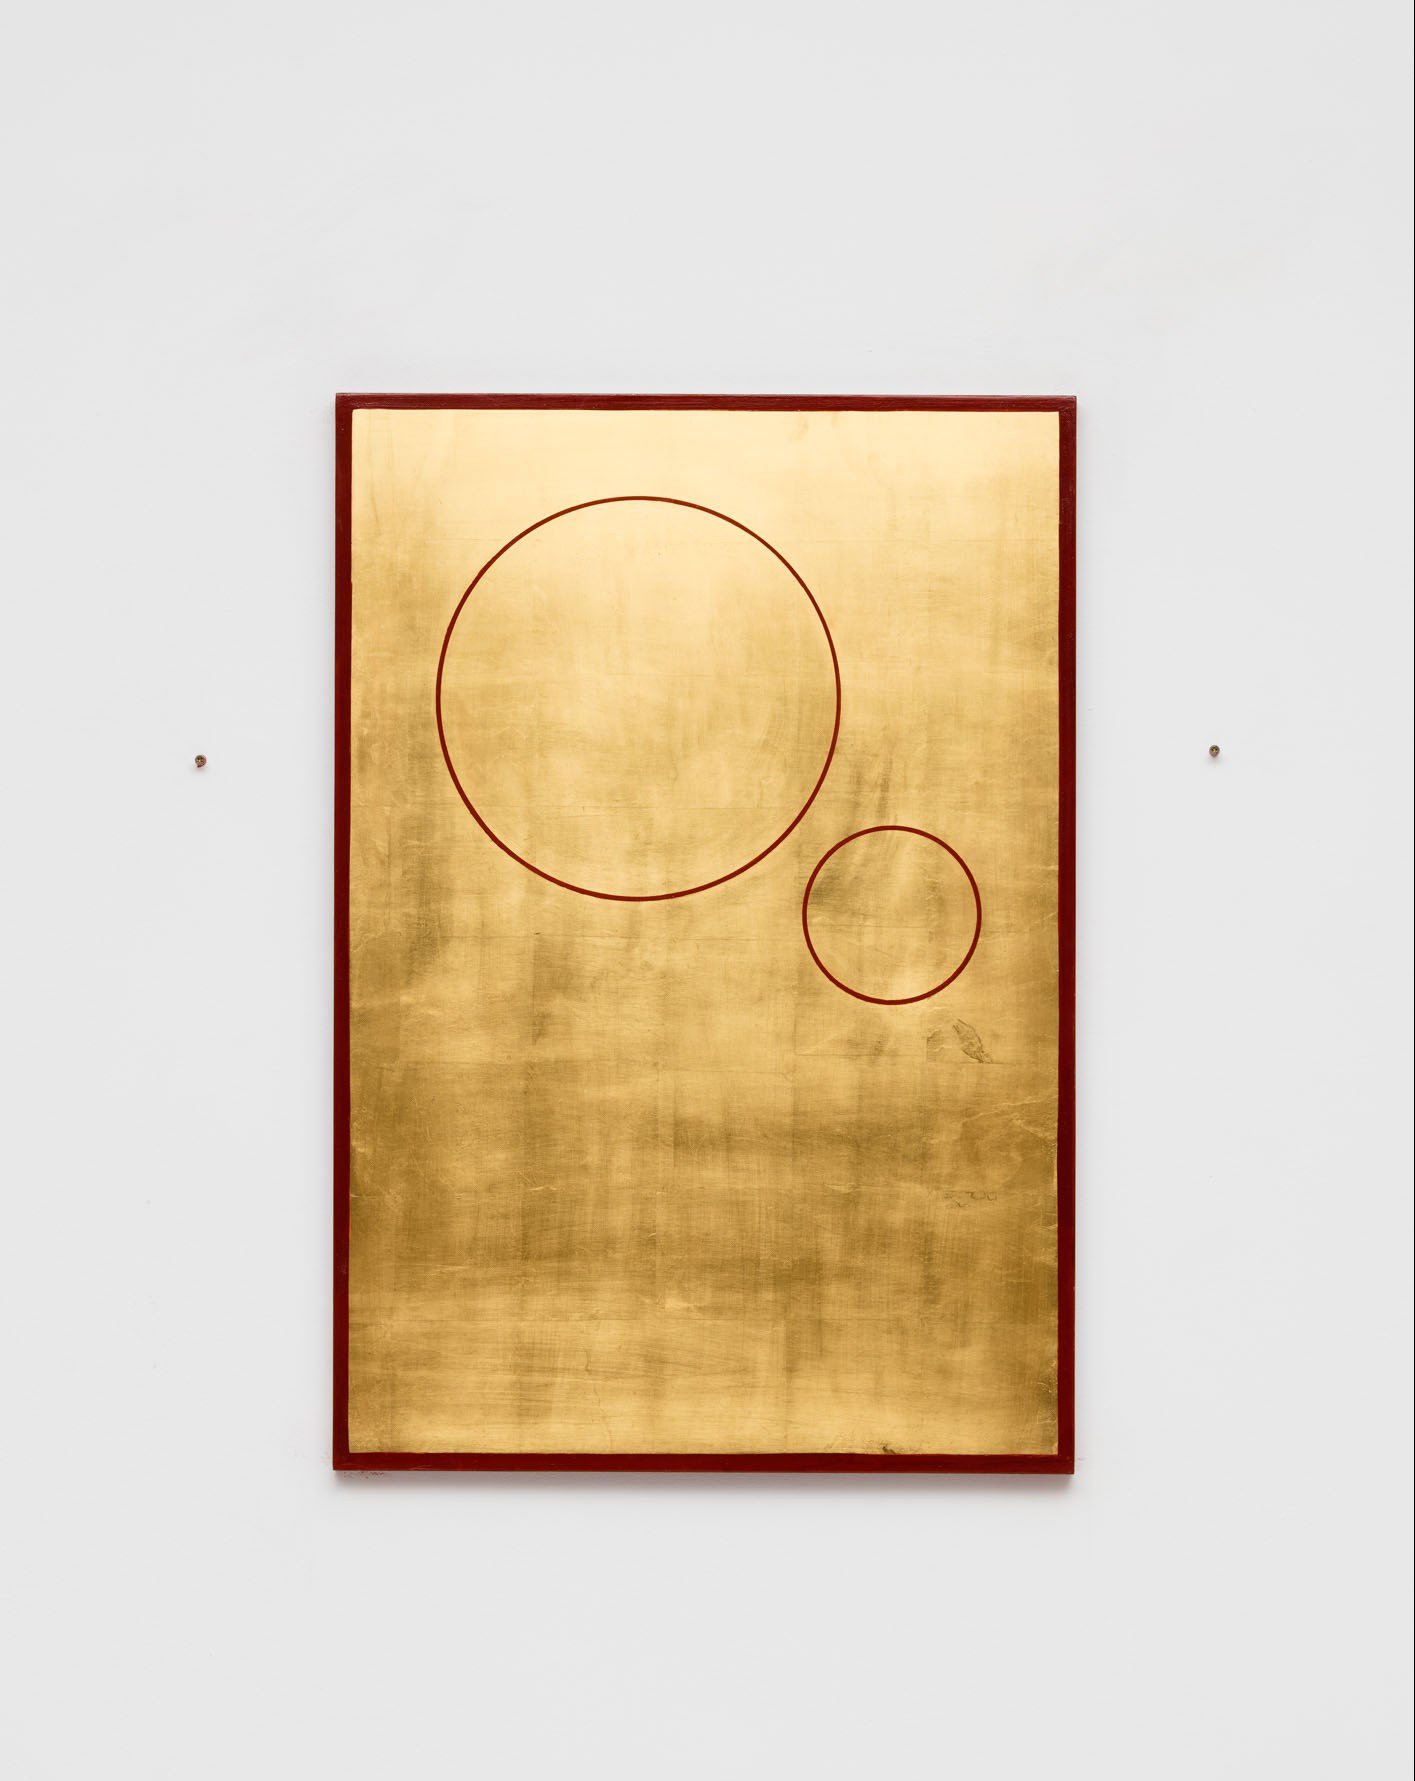 Christodoulos Panayiotou, Untitled, wood, paint, gold leaf, 80 x 55 cm (31 1/2 x 21 5/8 in), 2016